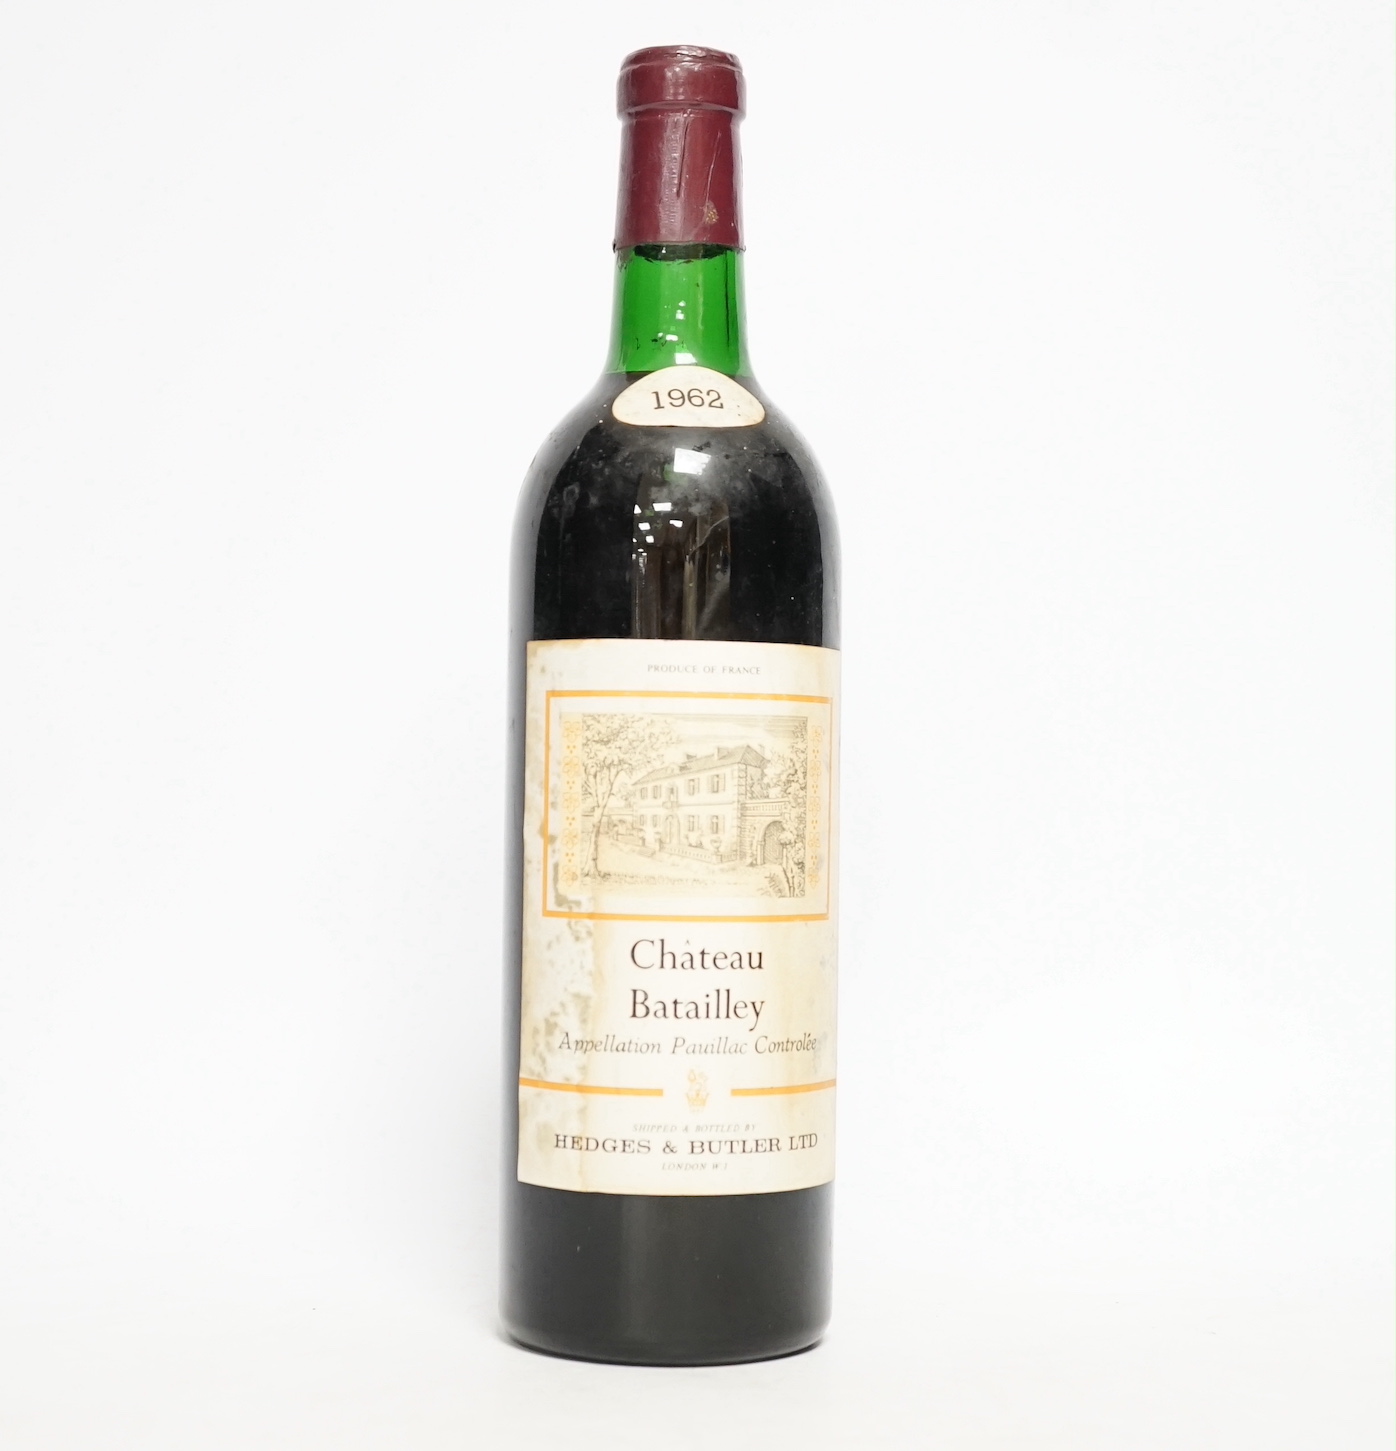 One bottle of Chateau Batailley, 1962